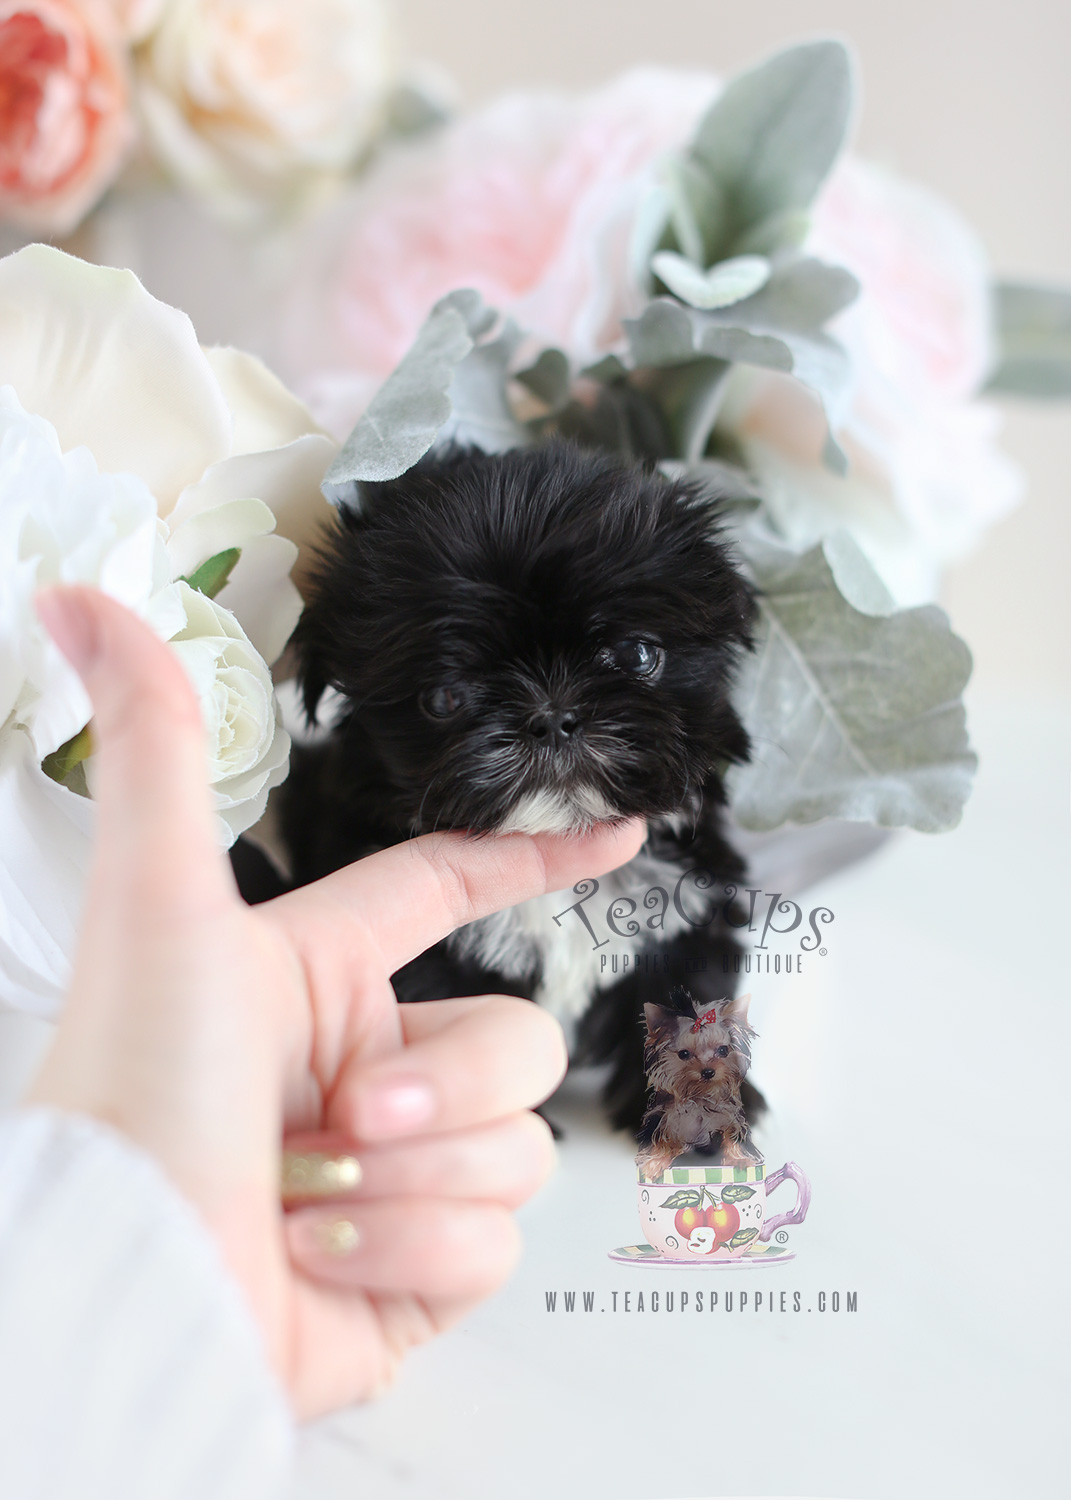 Teacup Puppies and Shih Tzu Puppies For Sale